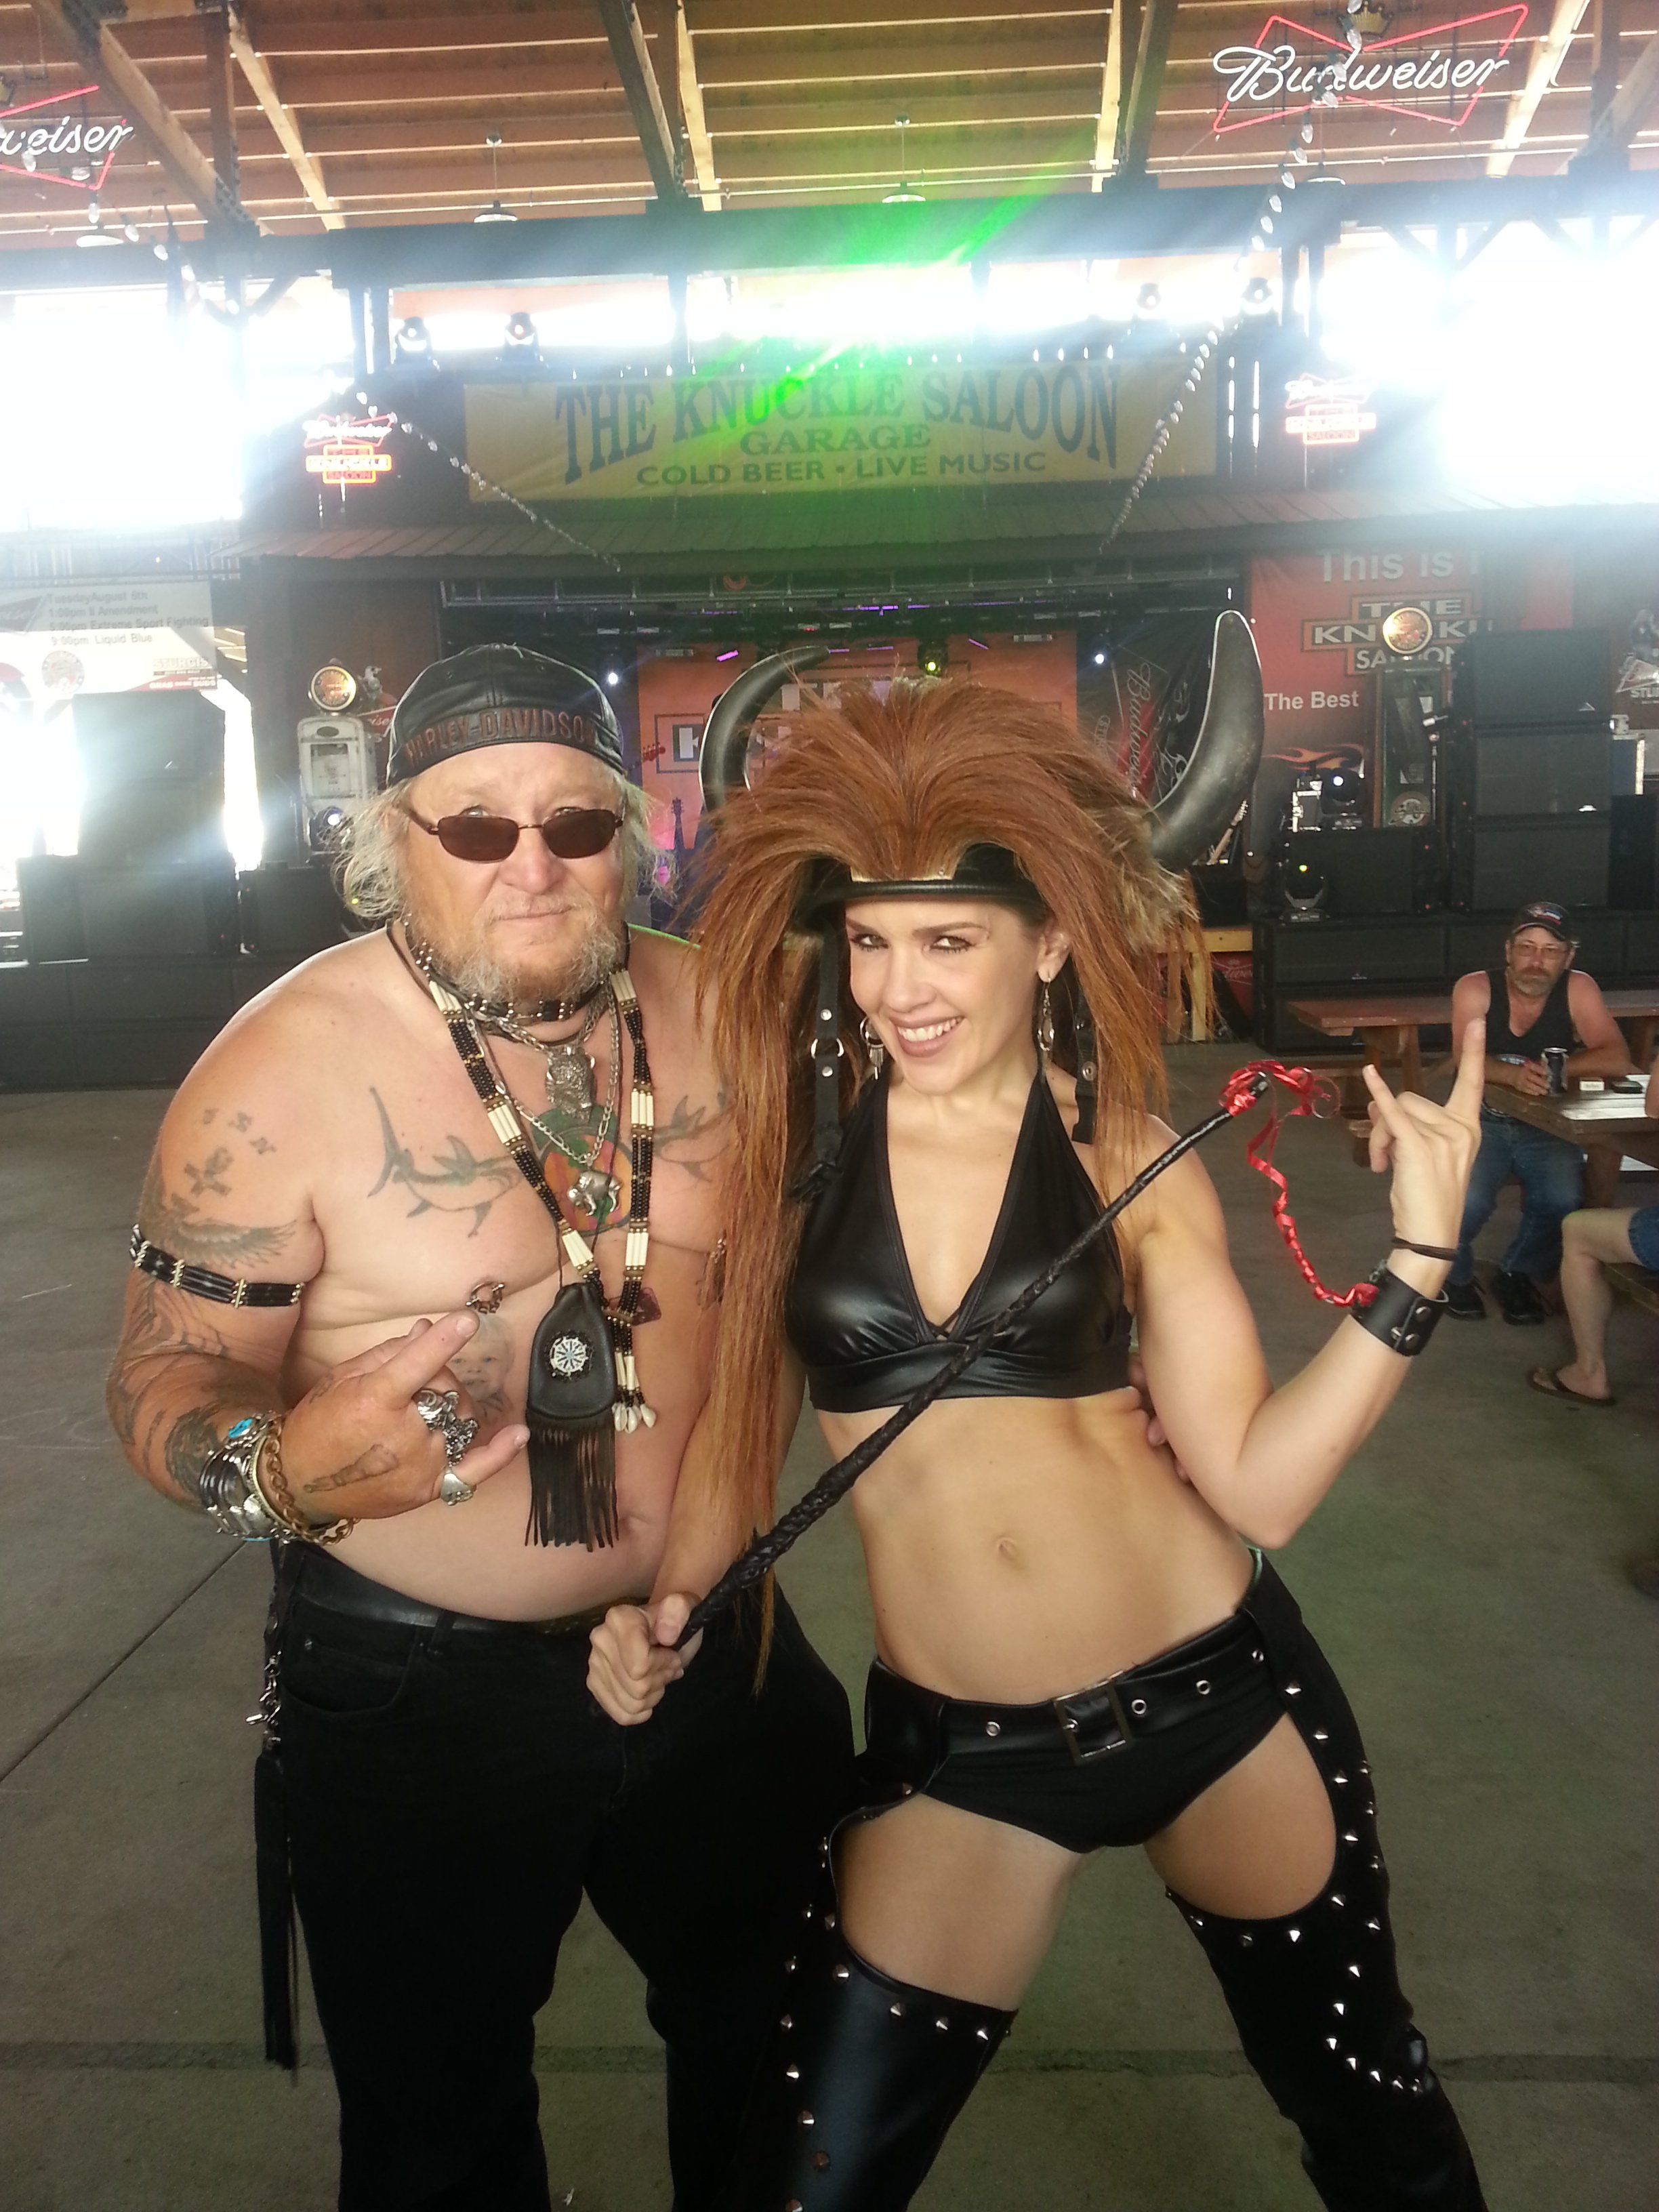 Hot nudes at sturgis rally